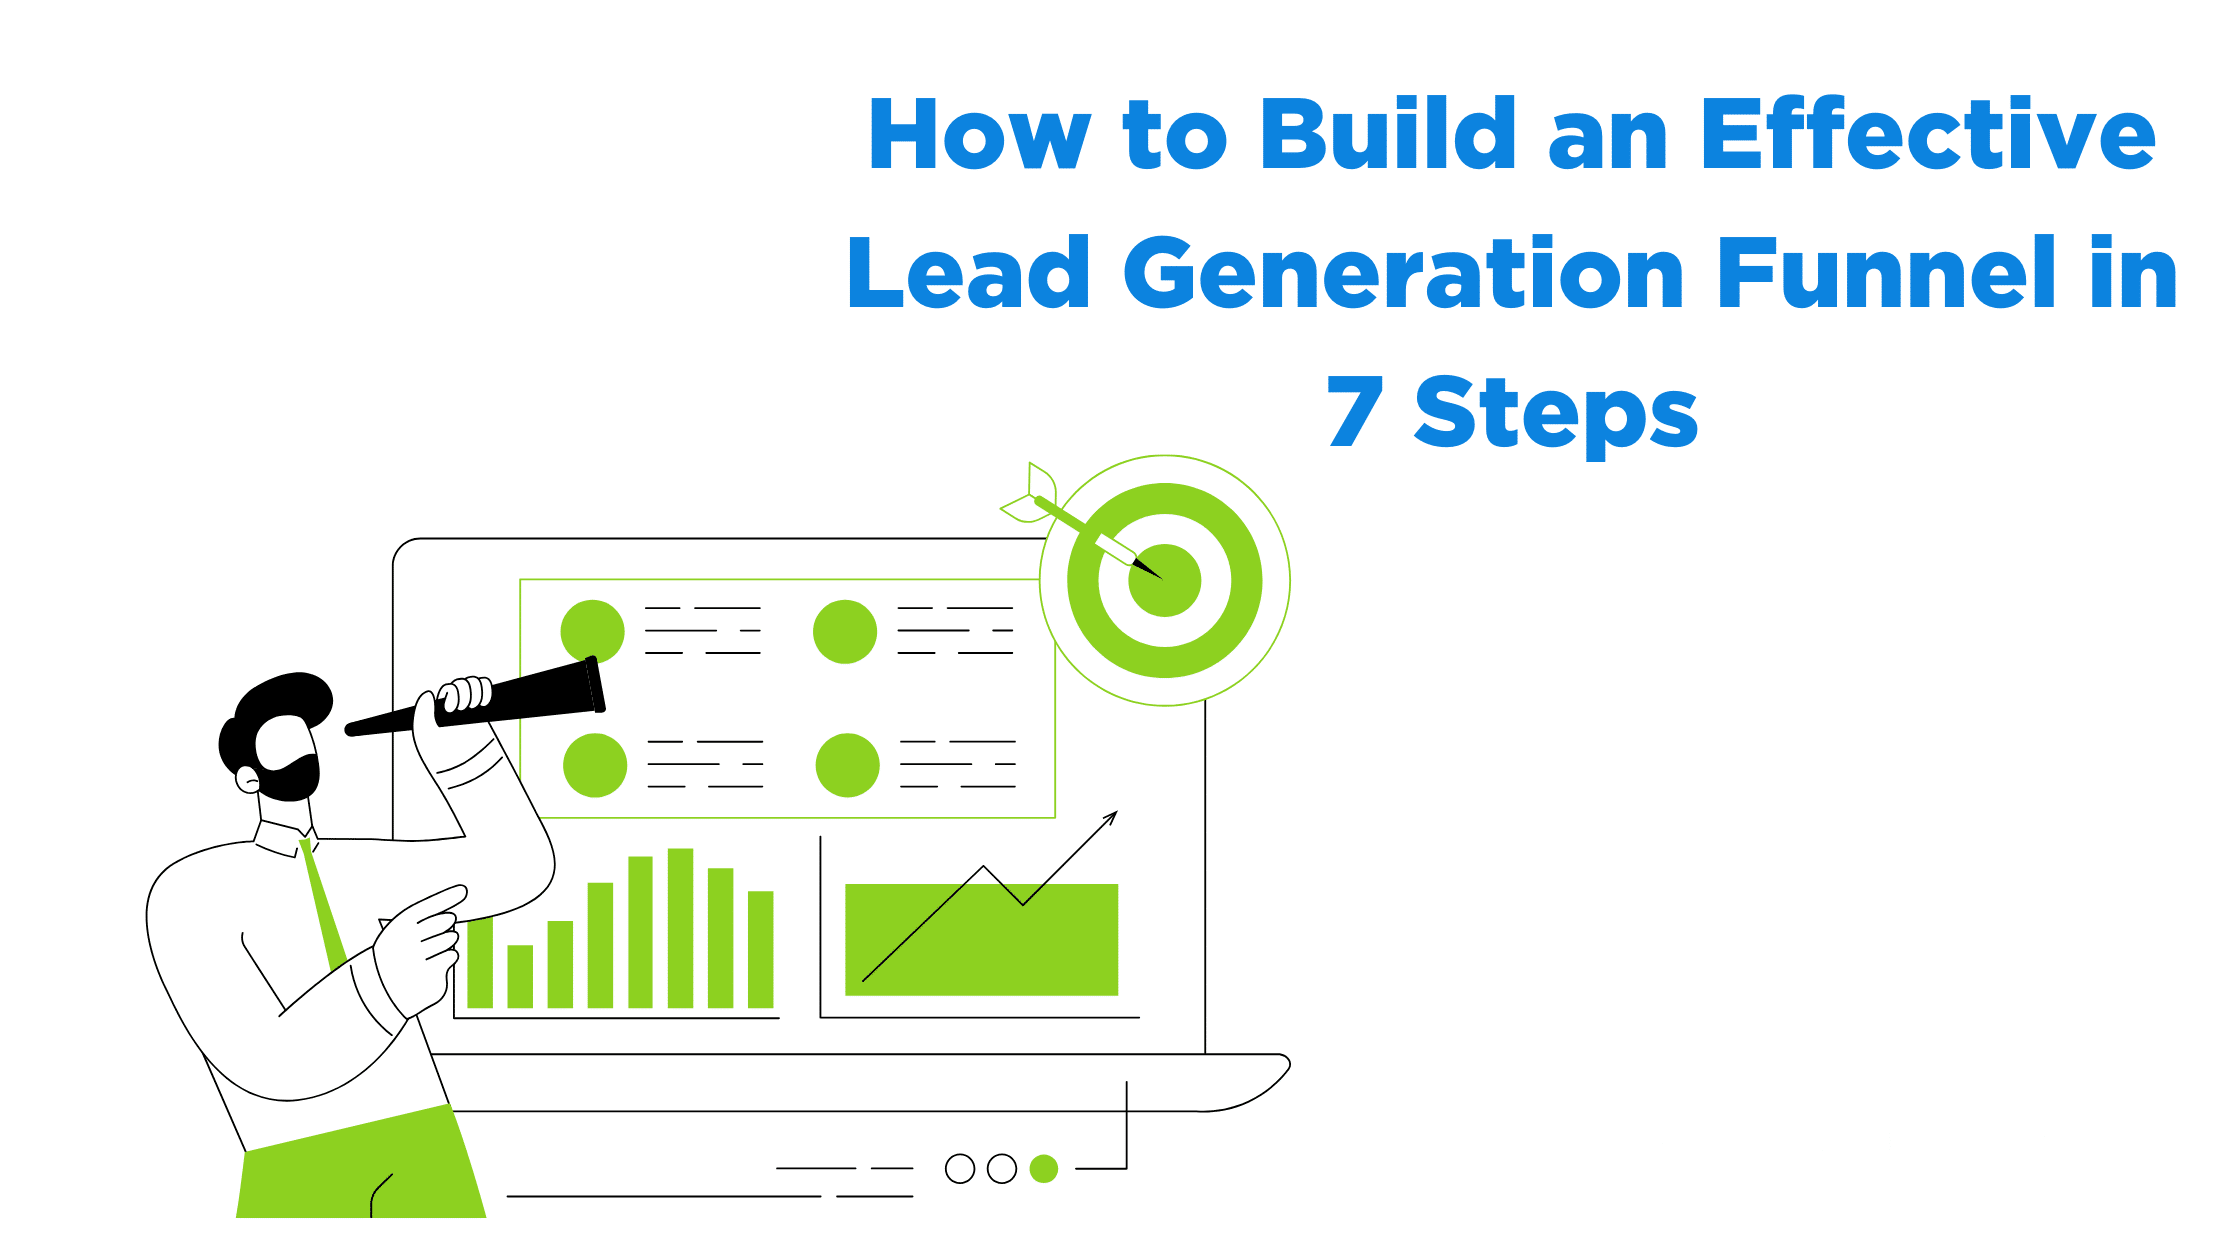 How To Build An Effective Lead Generation Funnel In 7 Steps